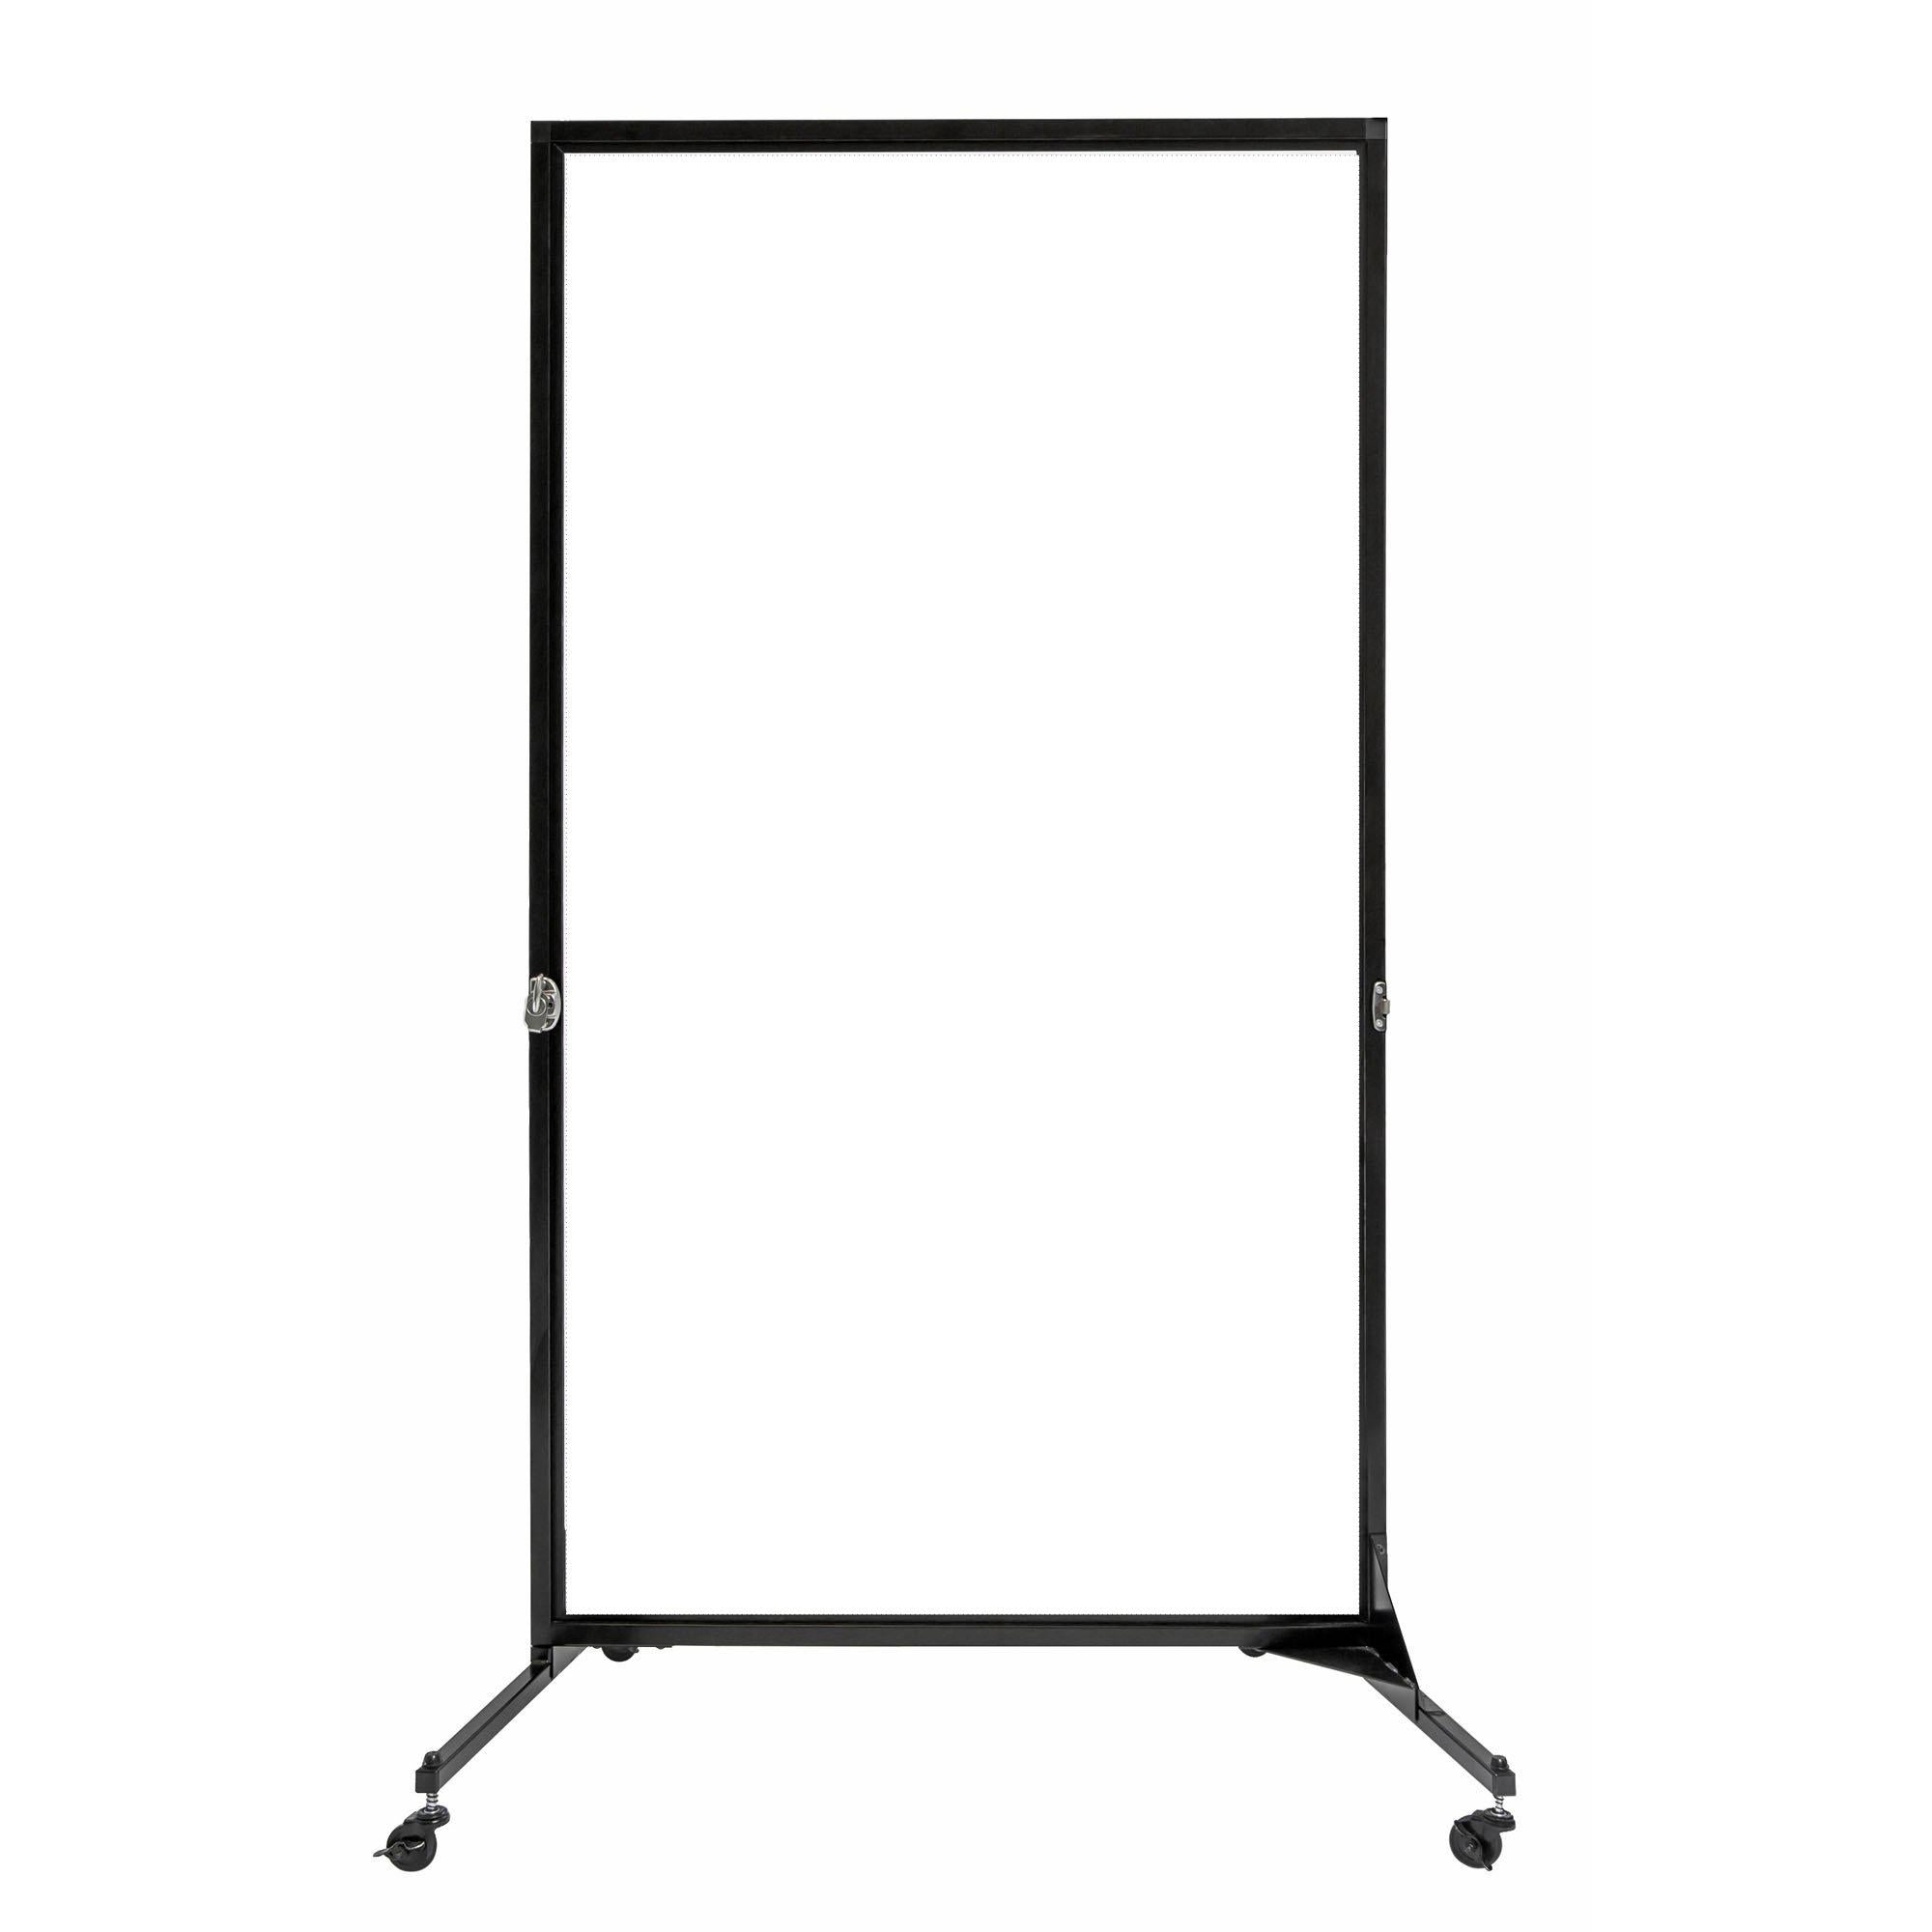 Screenflex White Board Room Divider, 6' 2" High-Partitions & Display Panels-1 Panel (3' 4" L)-